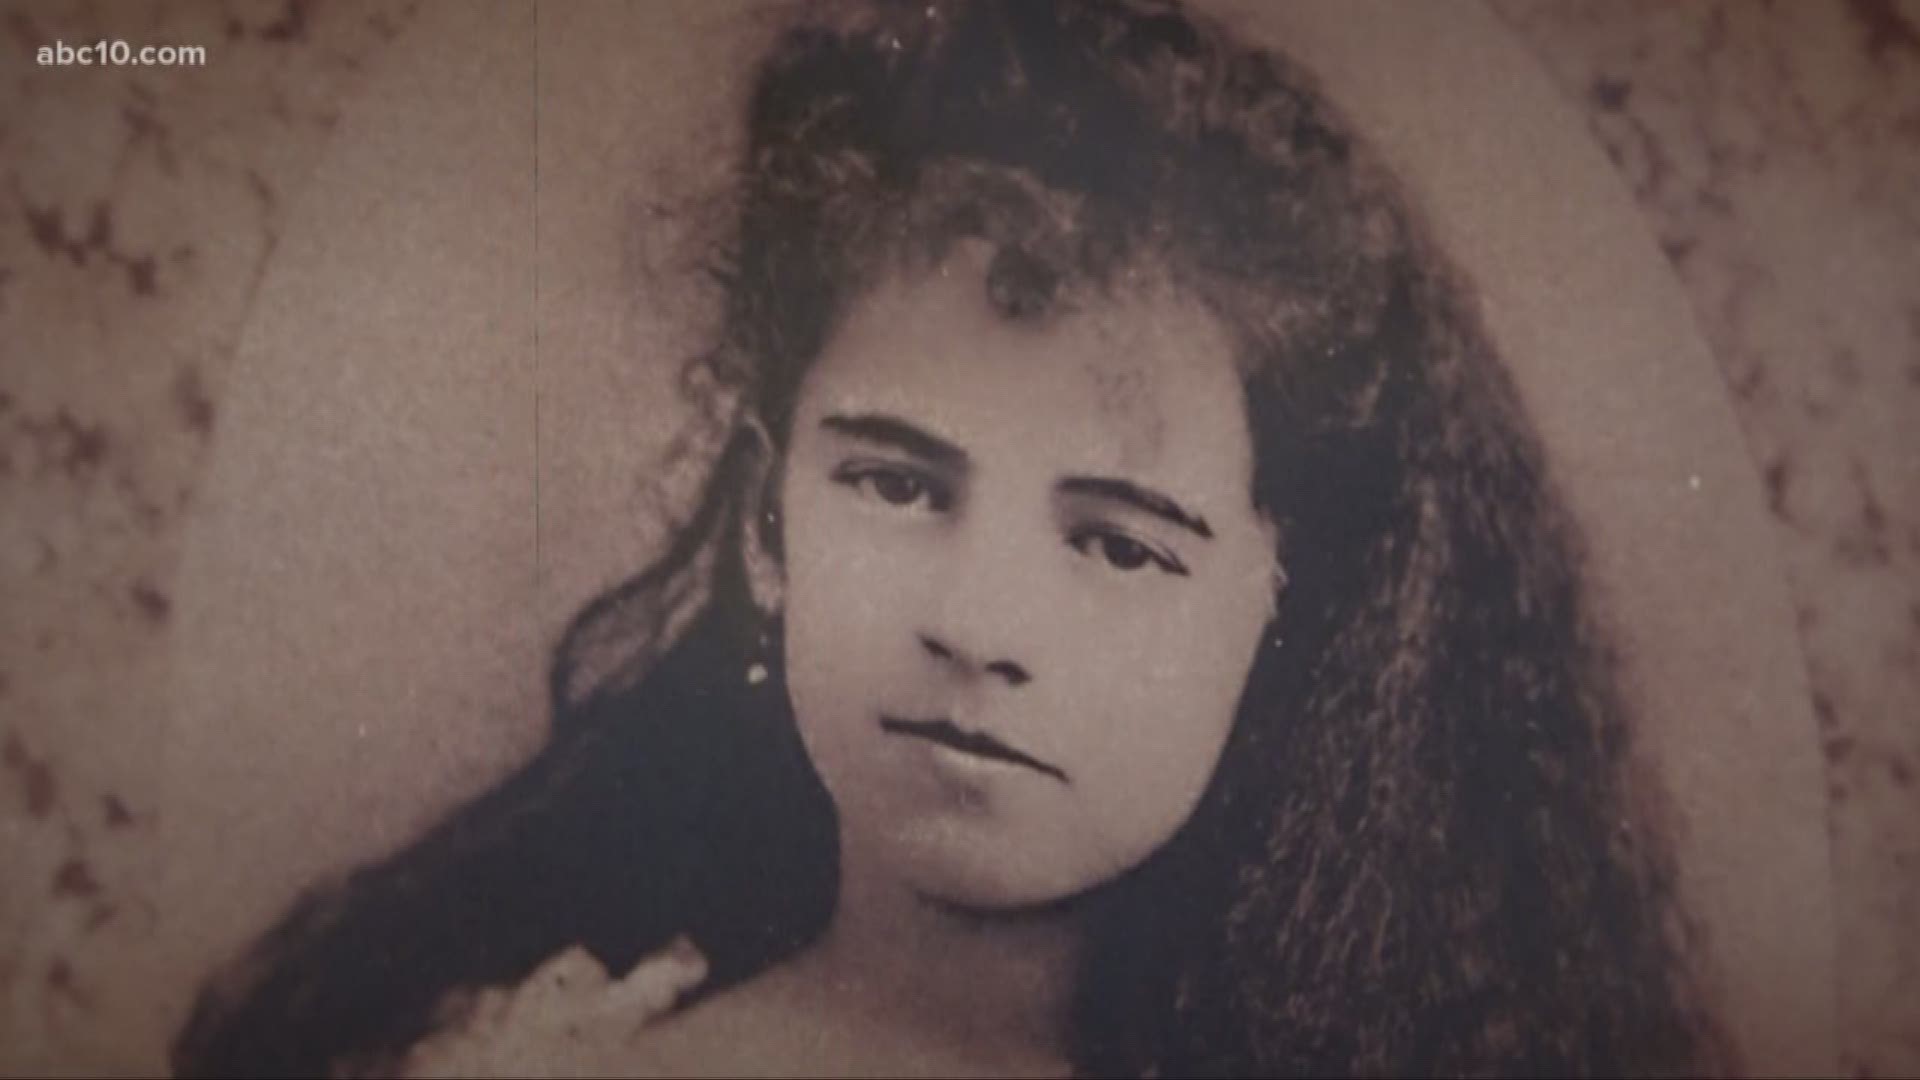 The story of 12-year-old May Woolsey has captivated the imagination of many since finding a chest full of her belongings during a home renovation a century after her death. 